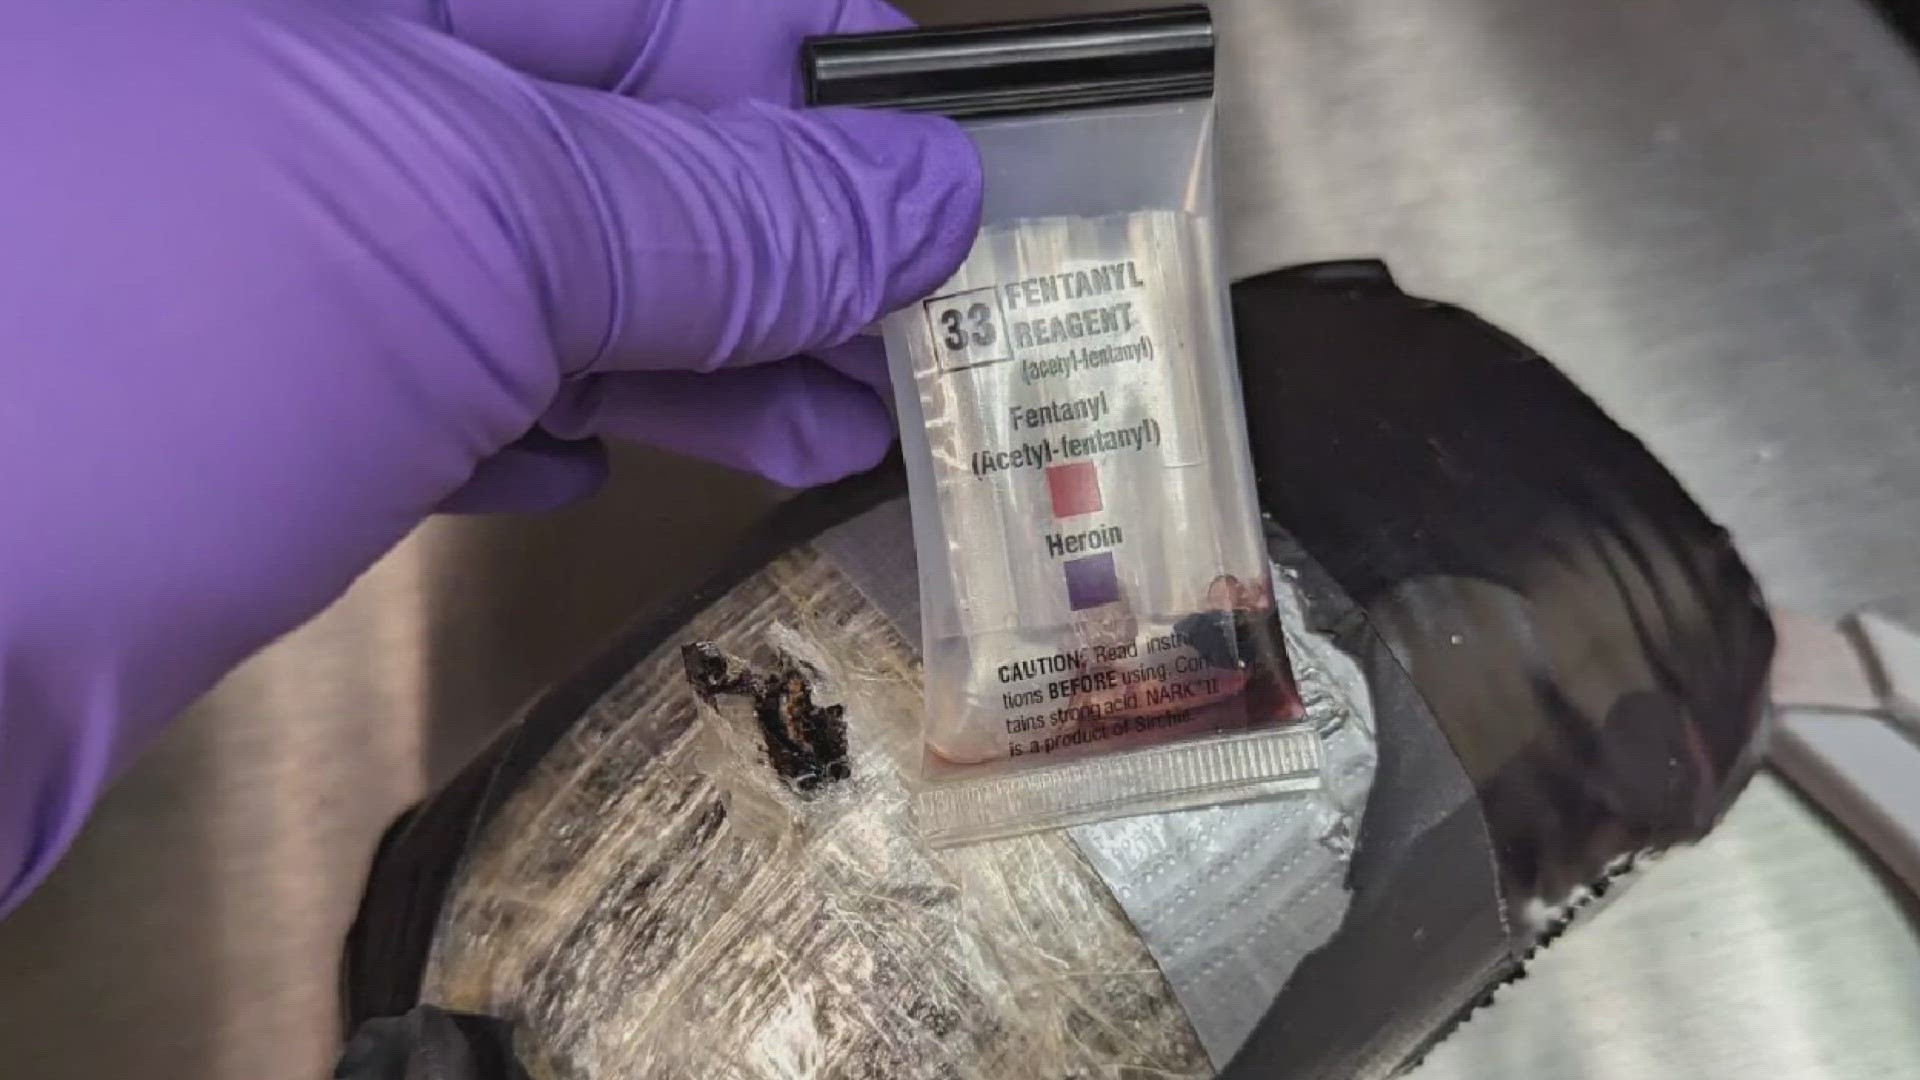 St. Tammany says an operation in conjunction with the FBI and DEA ended up taking nearly $300,000 of fentanyl off the street and netting 131 arrests.